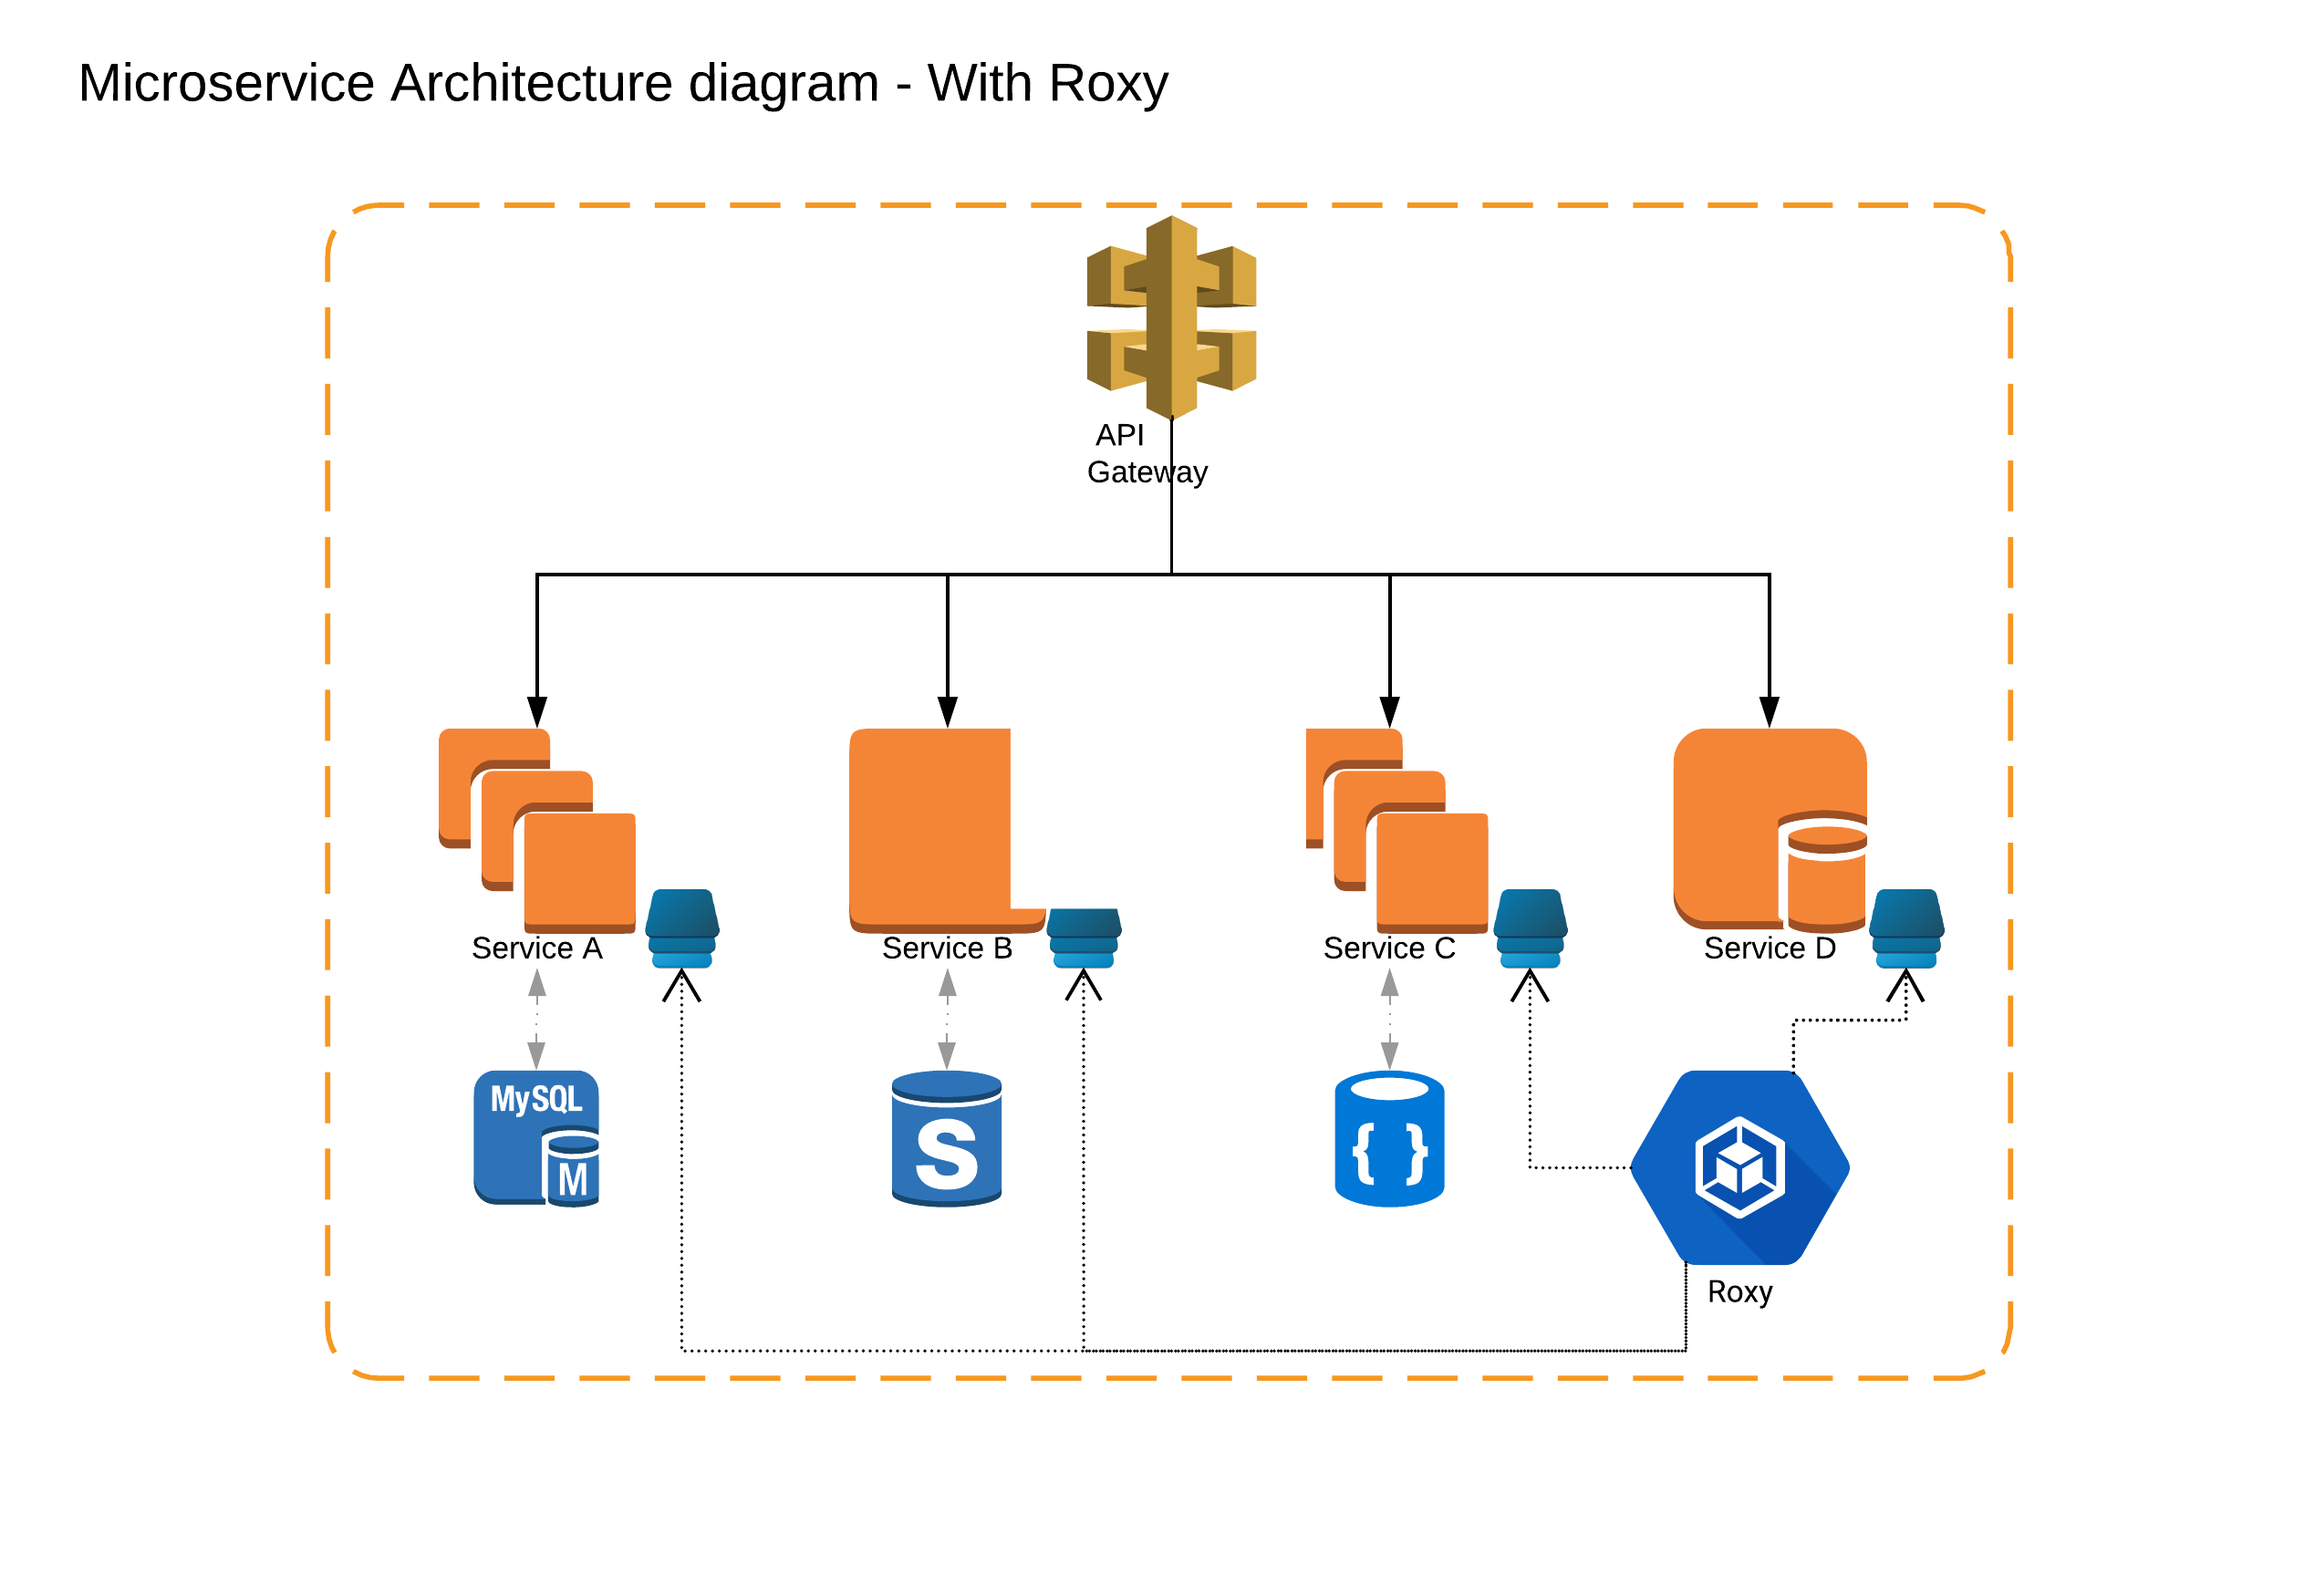 Microservice architecture with Roxy